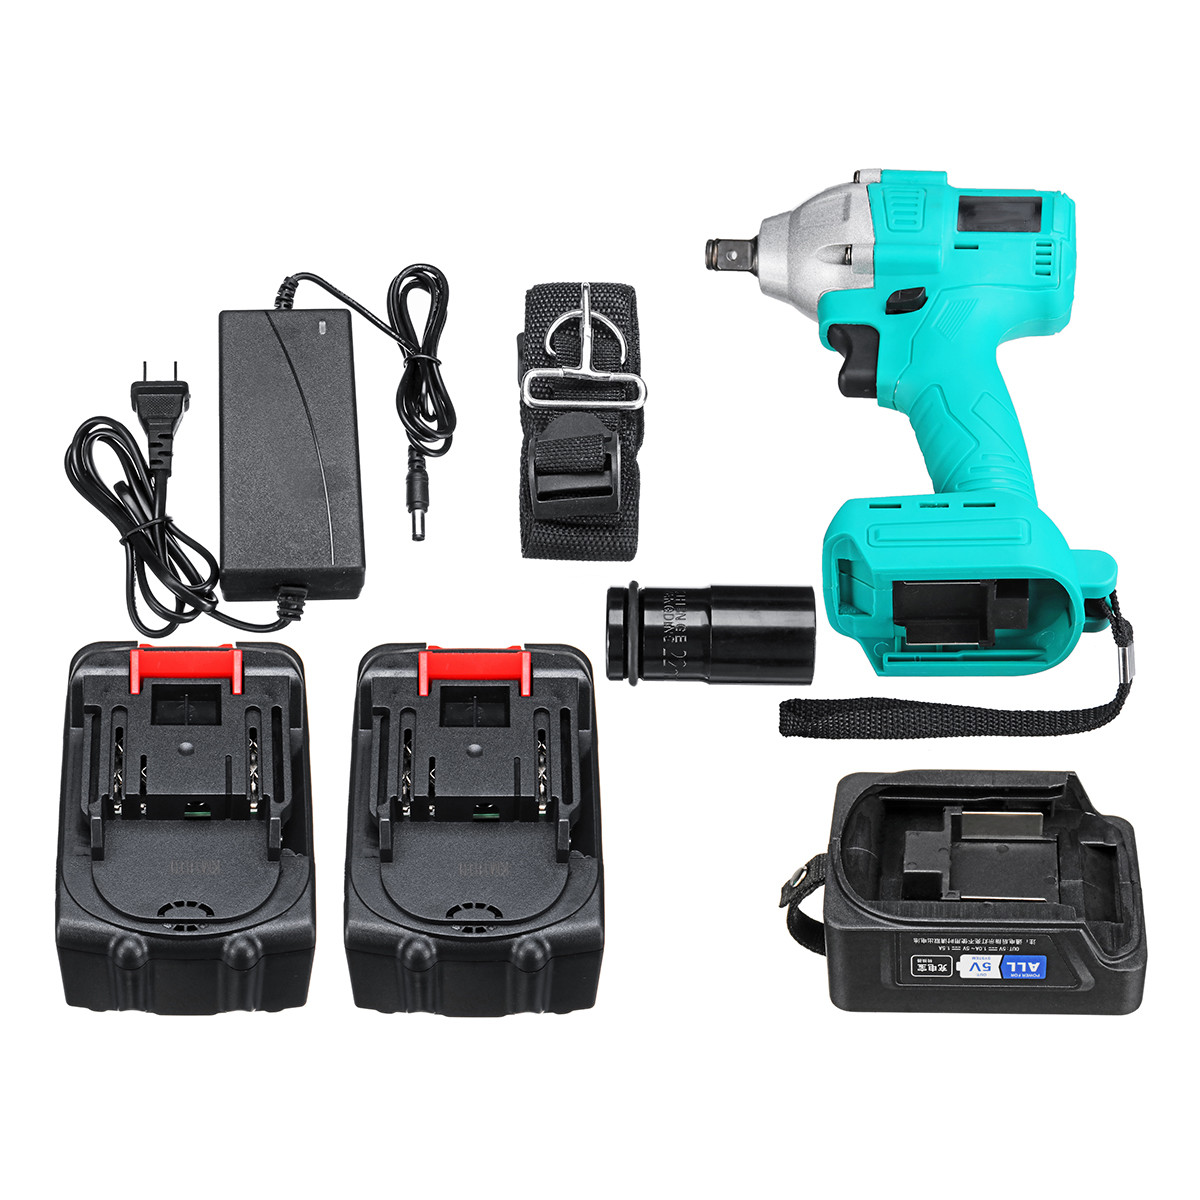 100-240V-Li-ion-Electric-Wrench-Brushless-Impact-Wrench-Wood-Work-Power-Tool-with-2-Battery-1391023-8